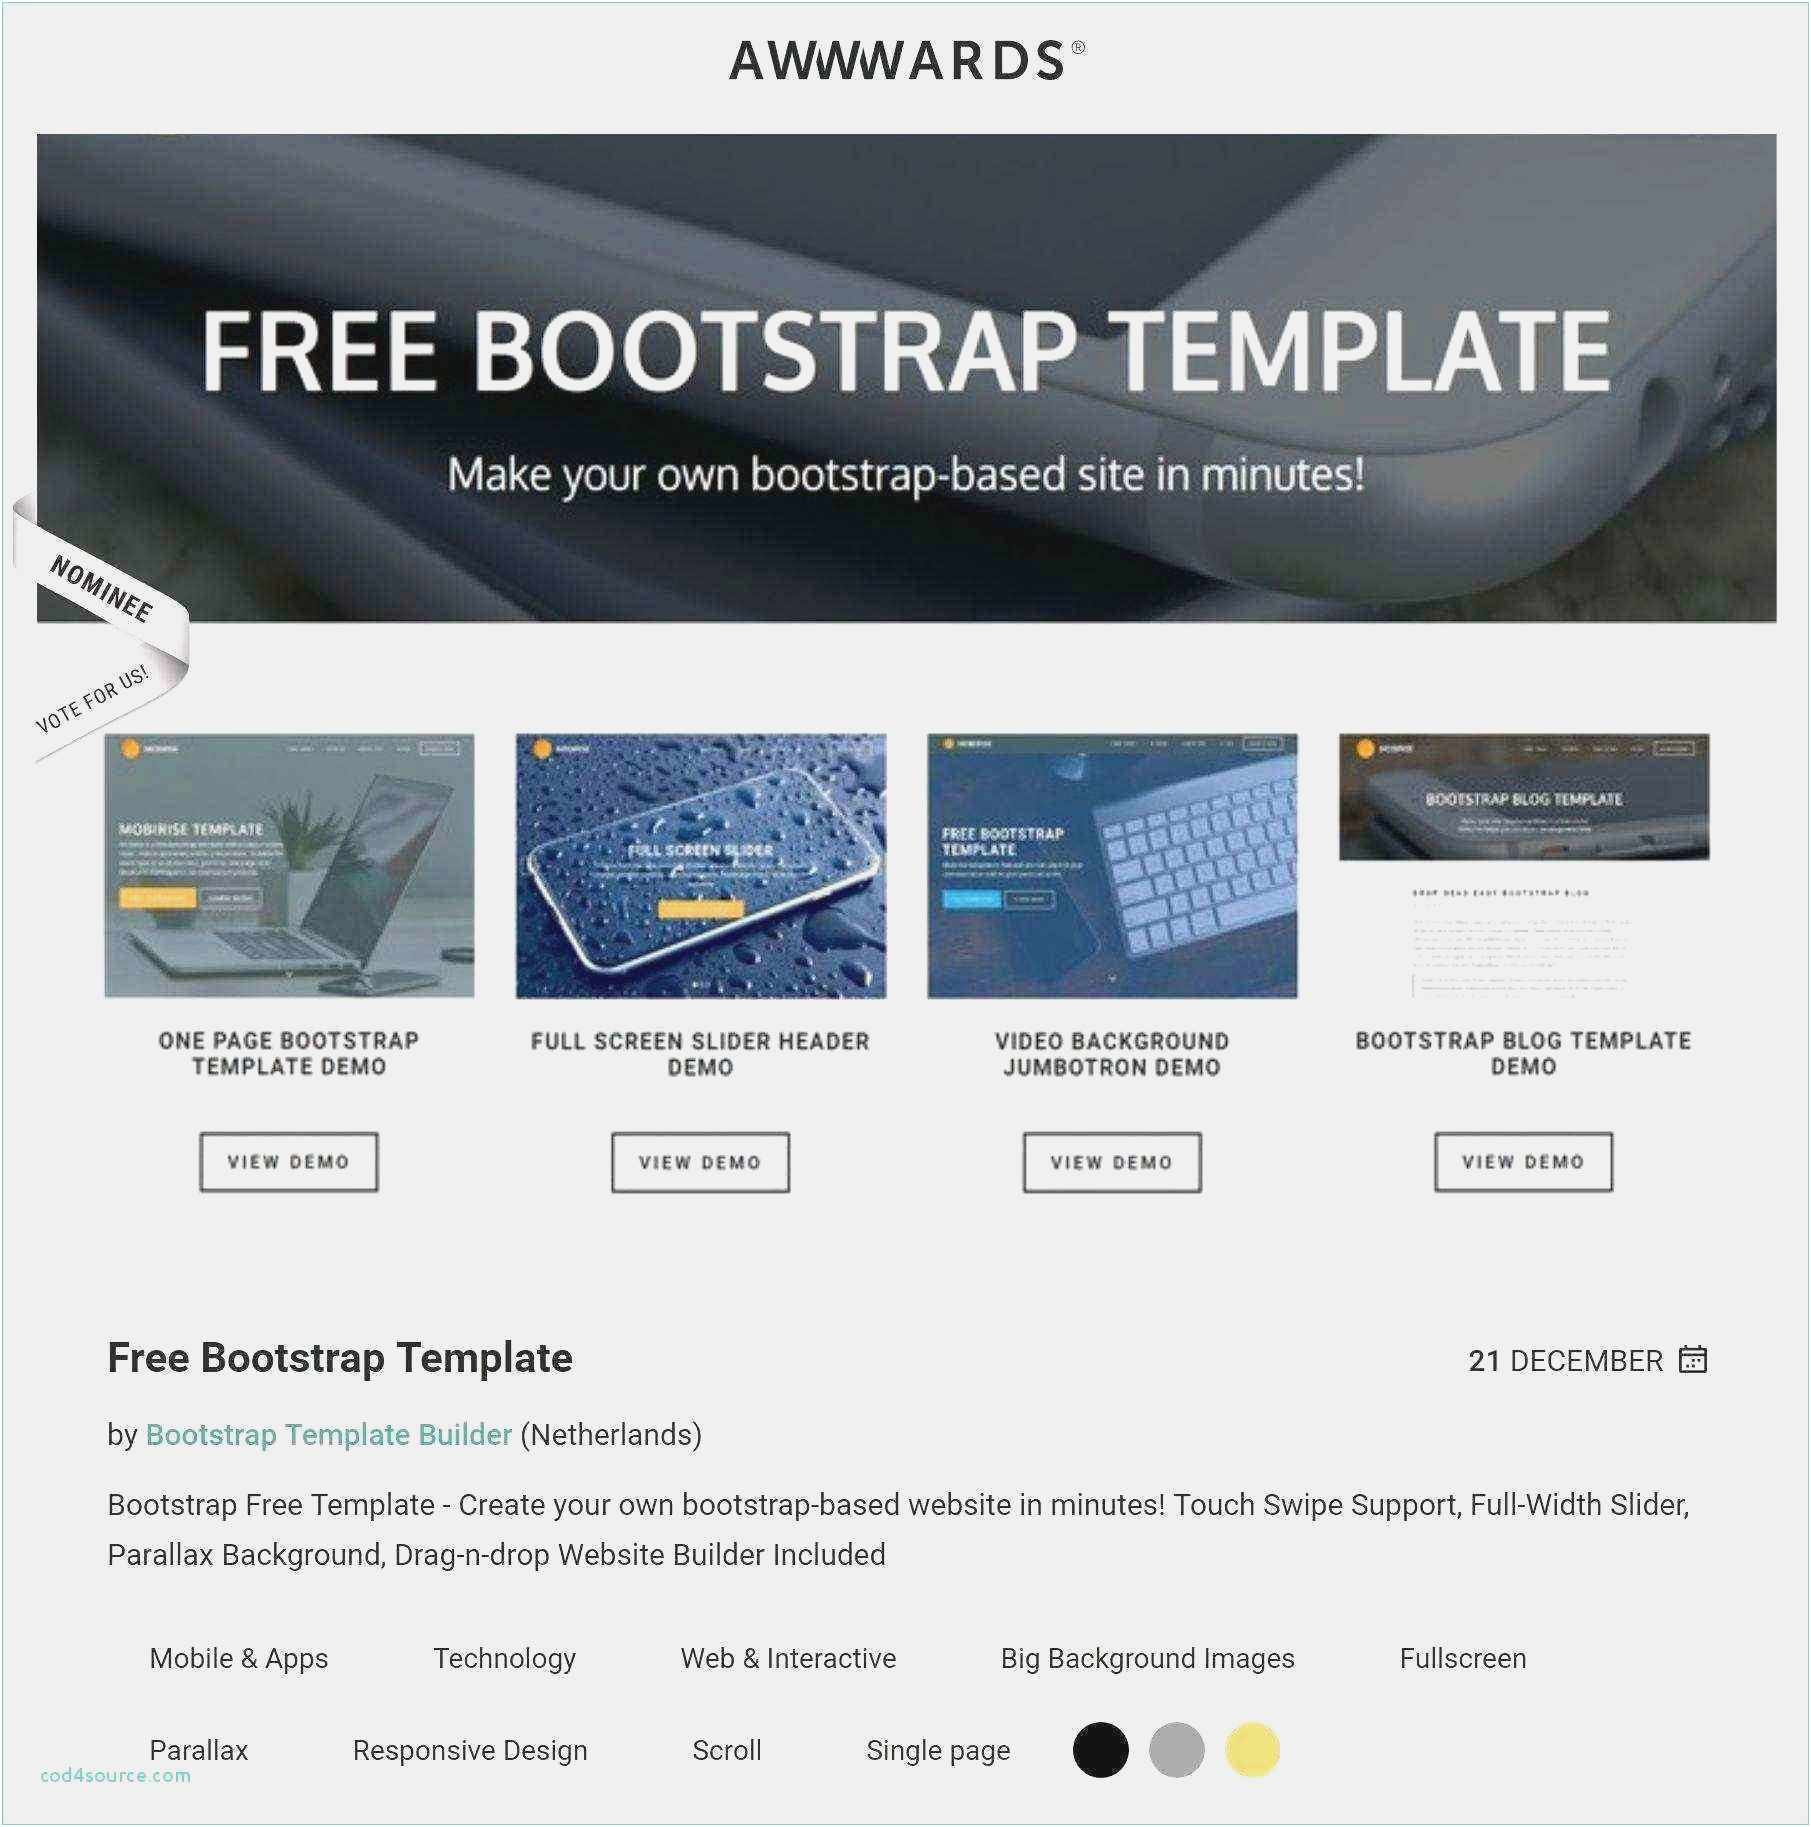 All free email templates